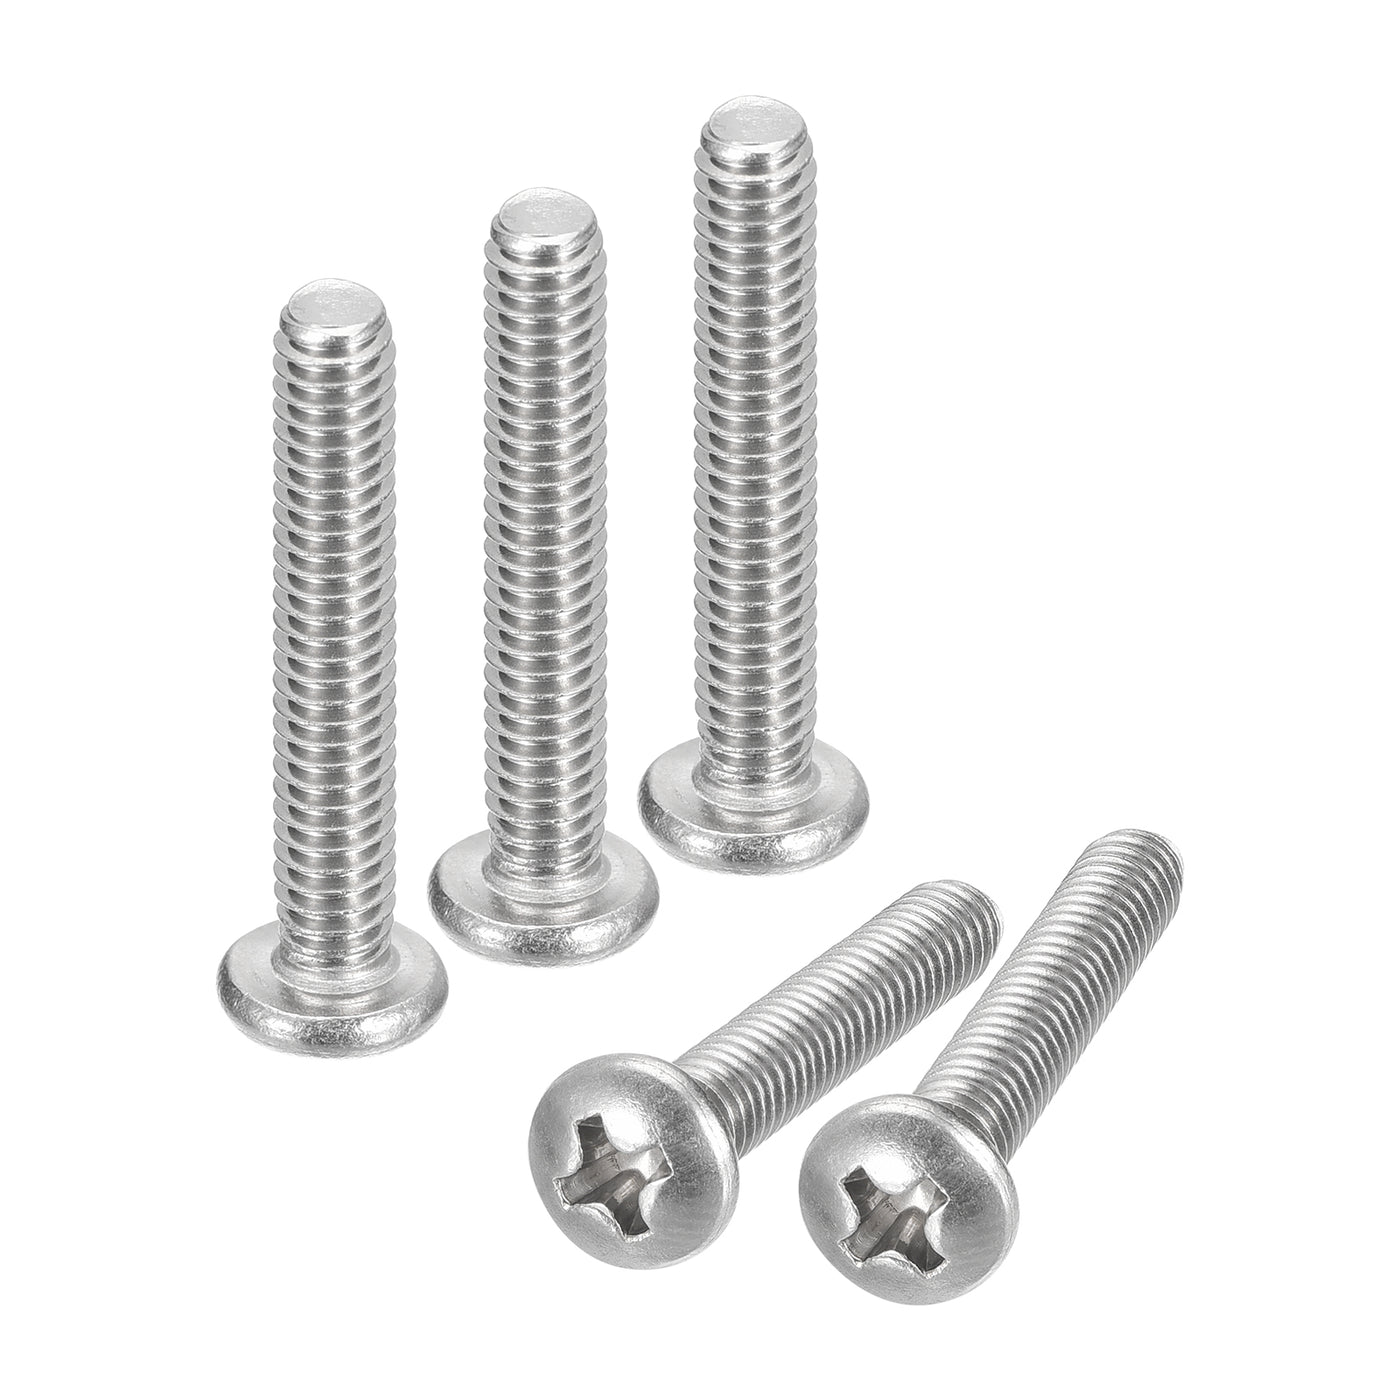 uxcell Uxcell #8-32x1" Pan Head Machine Screws, Stainless Steel 18-8 Screw, Pack of 100